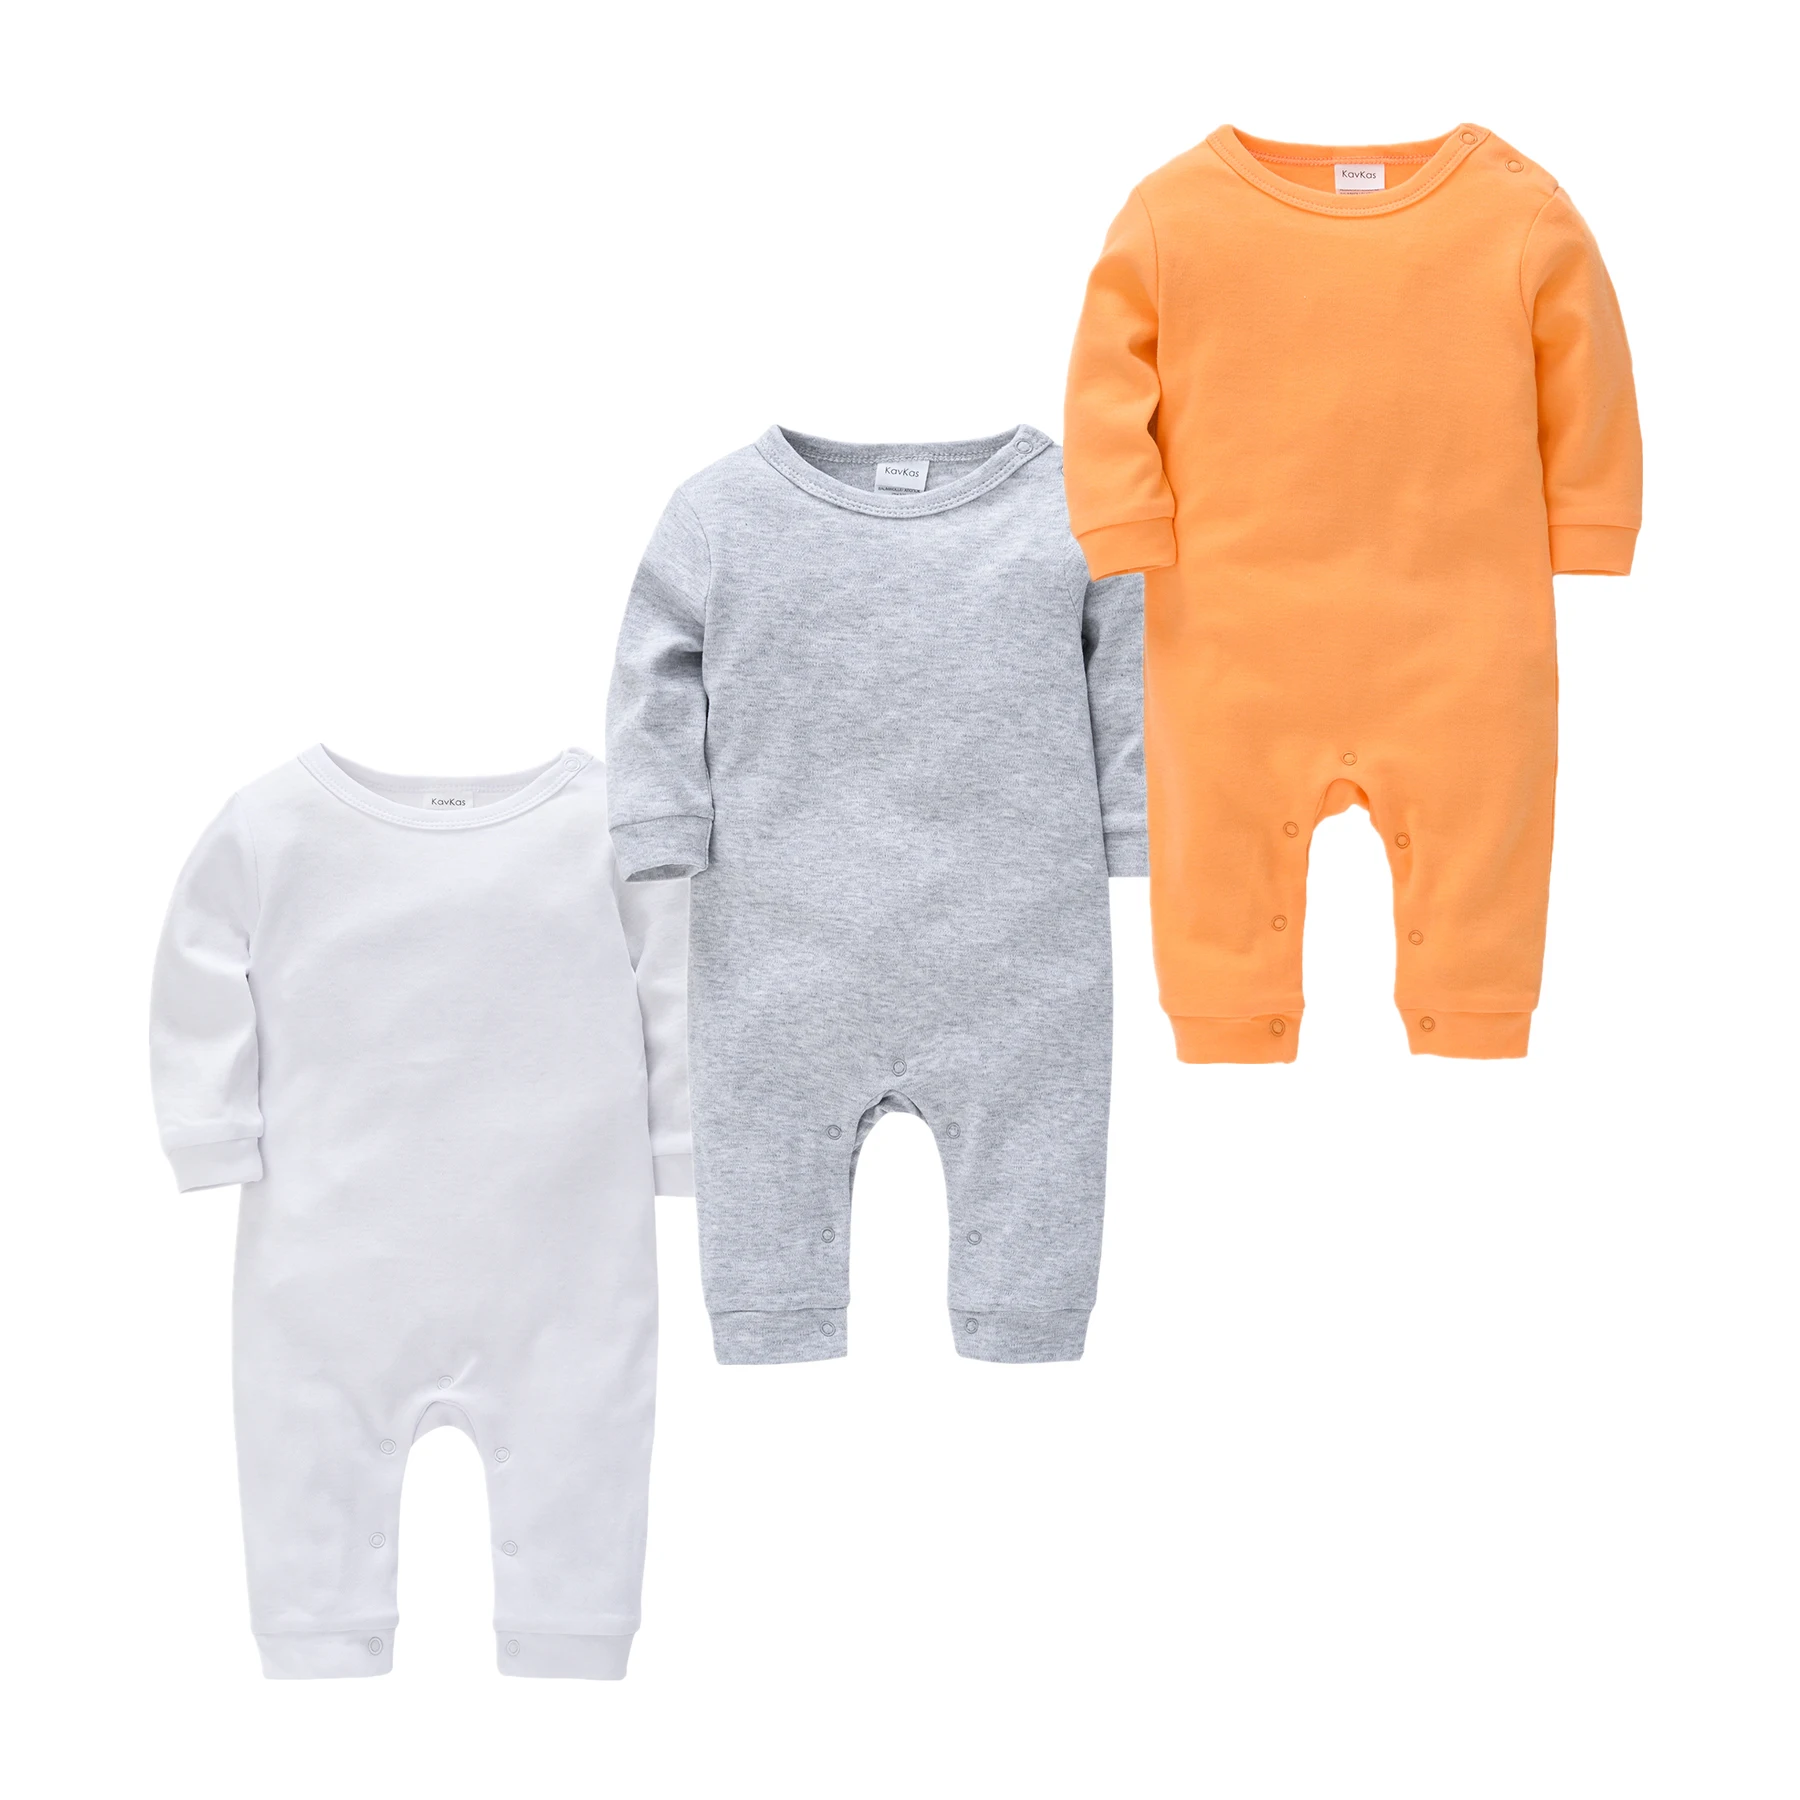 

Newborn Baby Boys Girl Rompers roupa de bebe Solid Infant Jumpsuit Long Sleeve Cotton Pajamas 0-12Month Overalls Baby Clothes